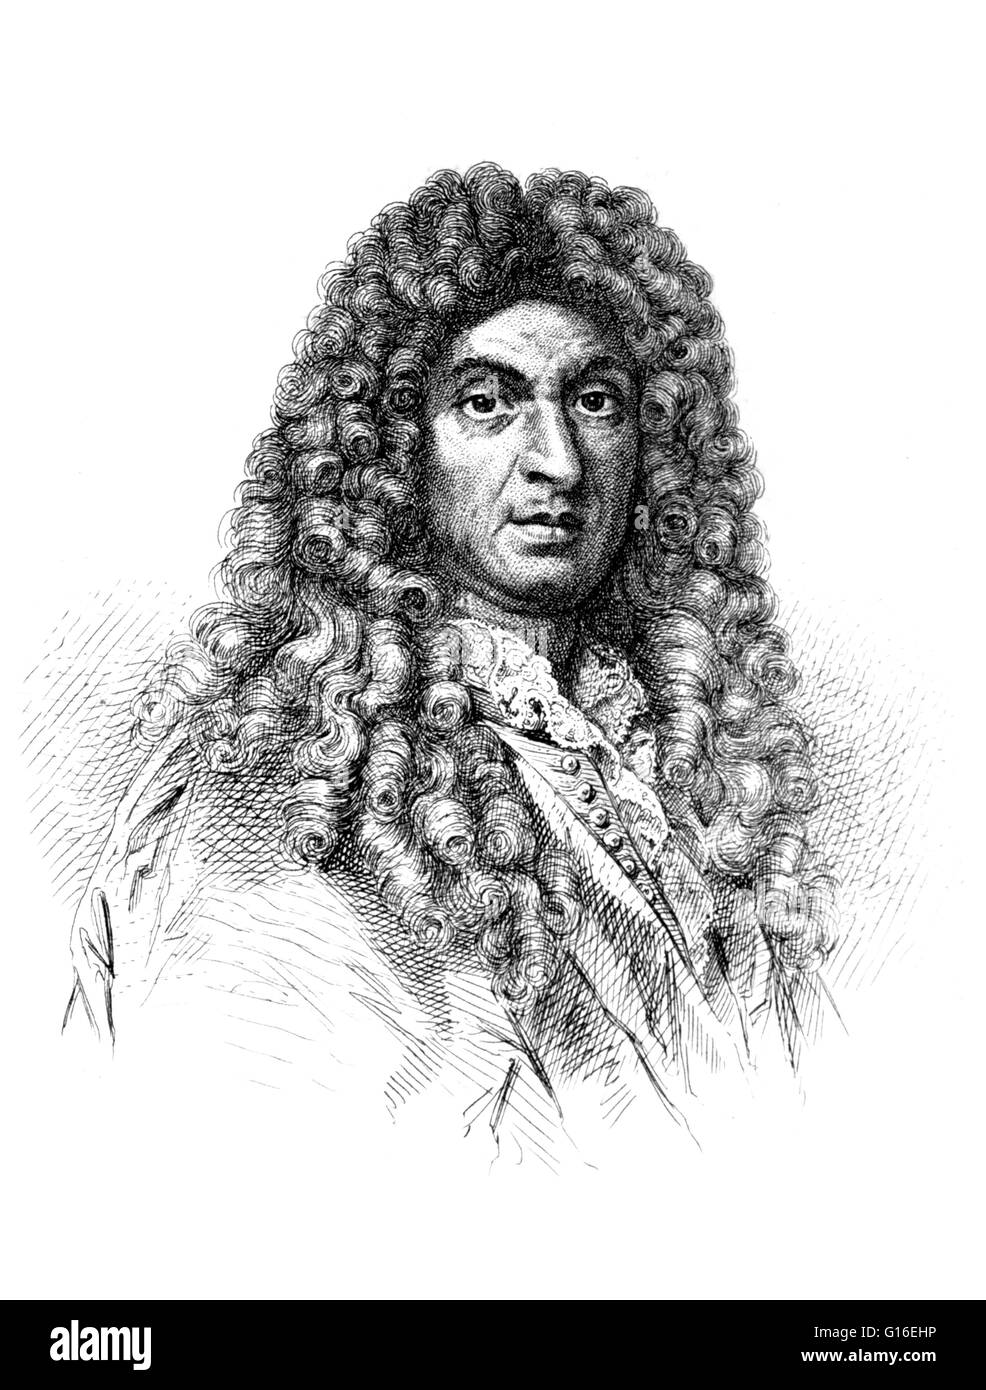 Jean-Baptiste Lully (born Giovanni Battista Lulli November 28, 1632 - March 22, 1687) was an Italian-born French composer, instrumentalist, and dancer who spent most of his life working in the court of Louis XIV of France. He is considered the chief maste Stock Photo